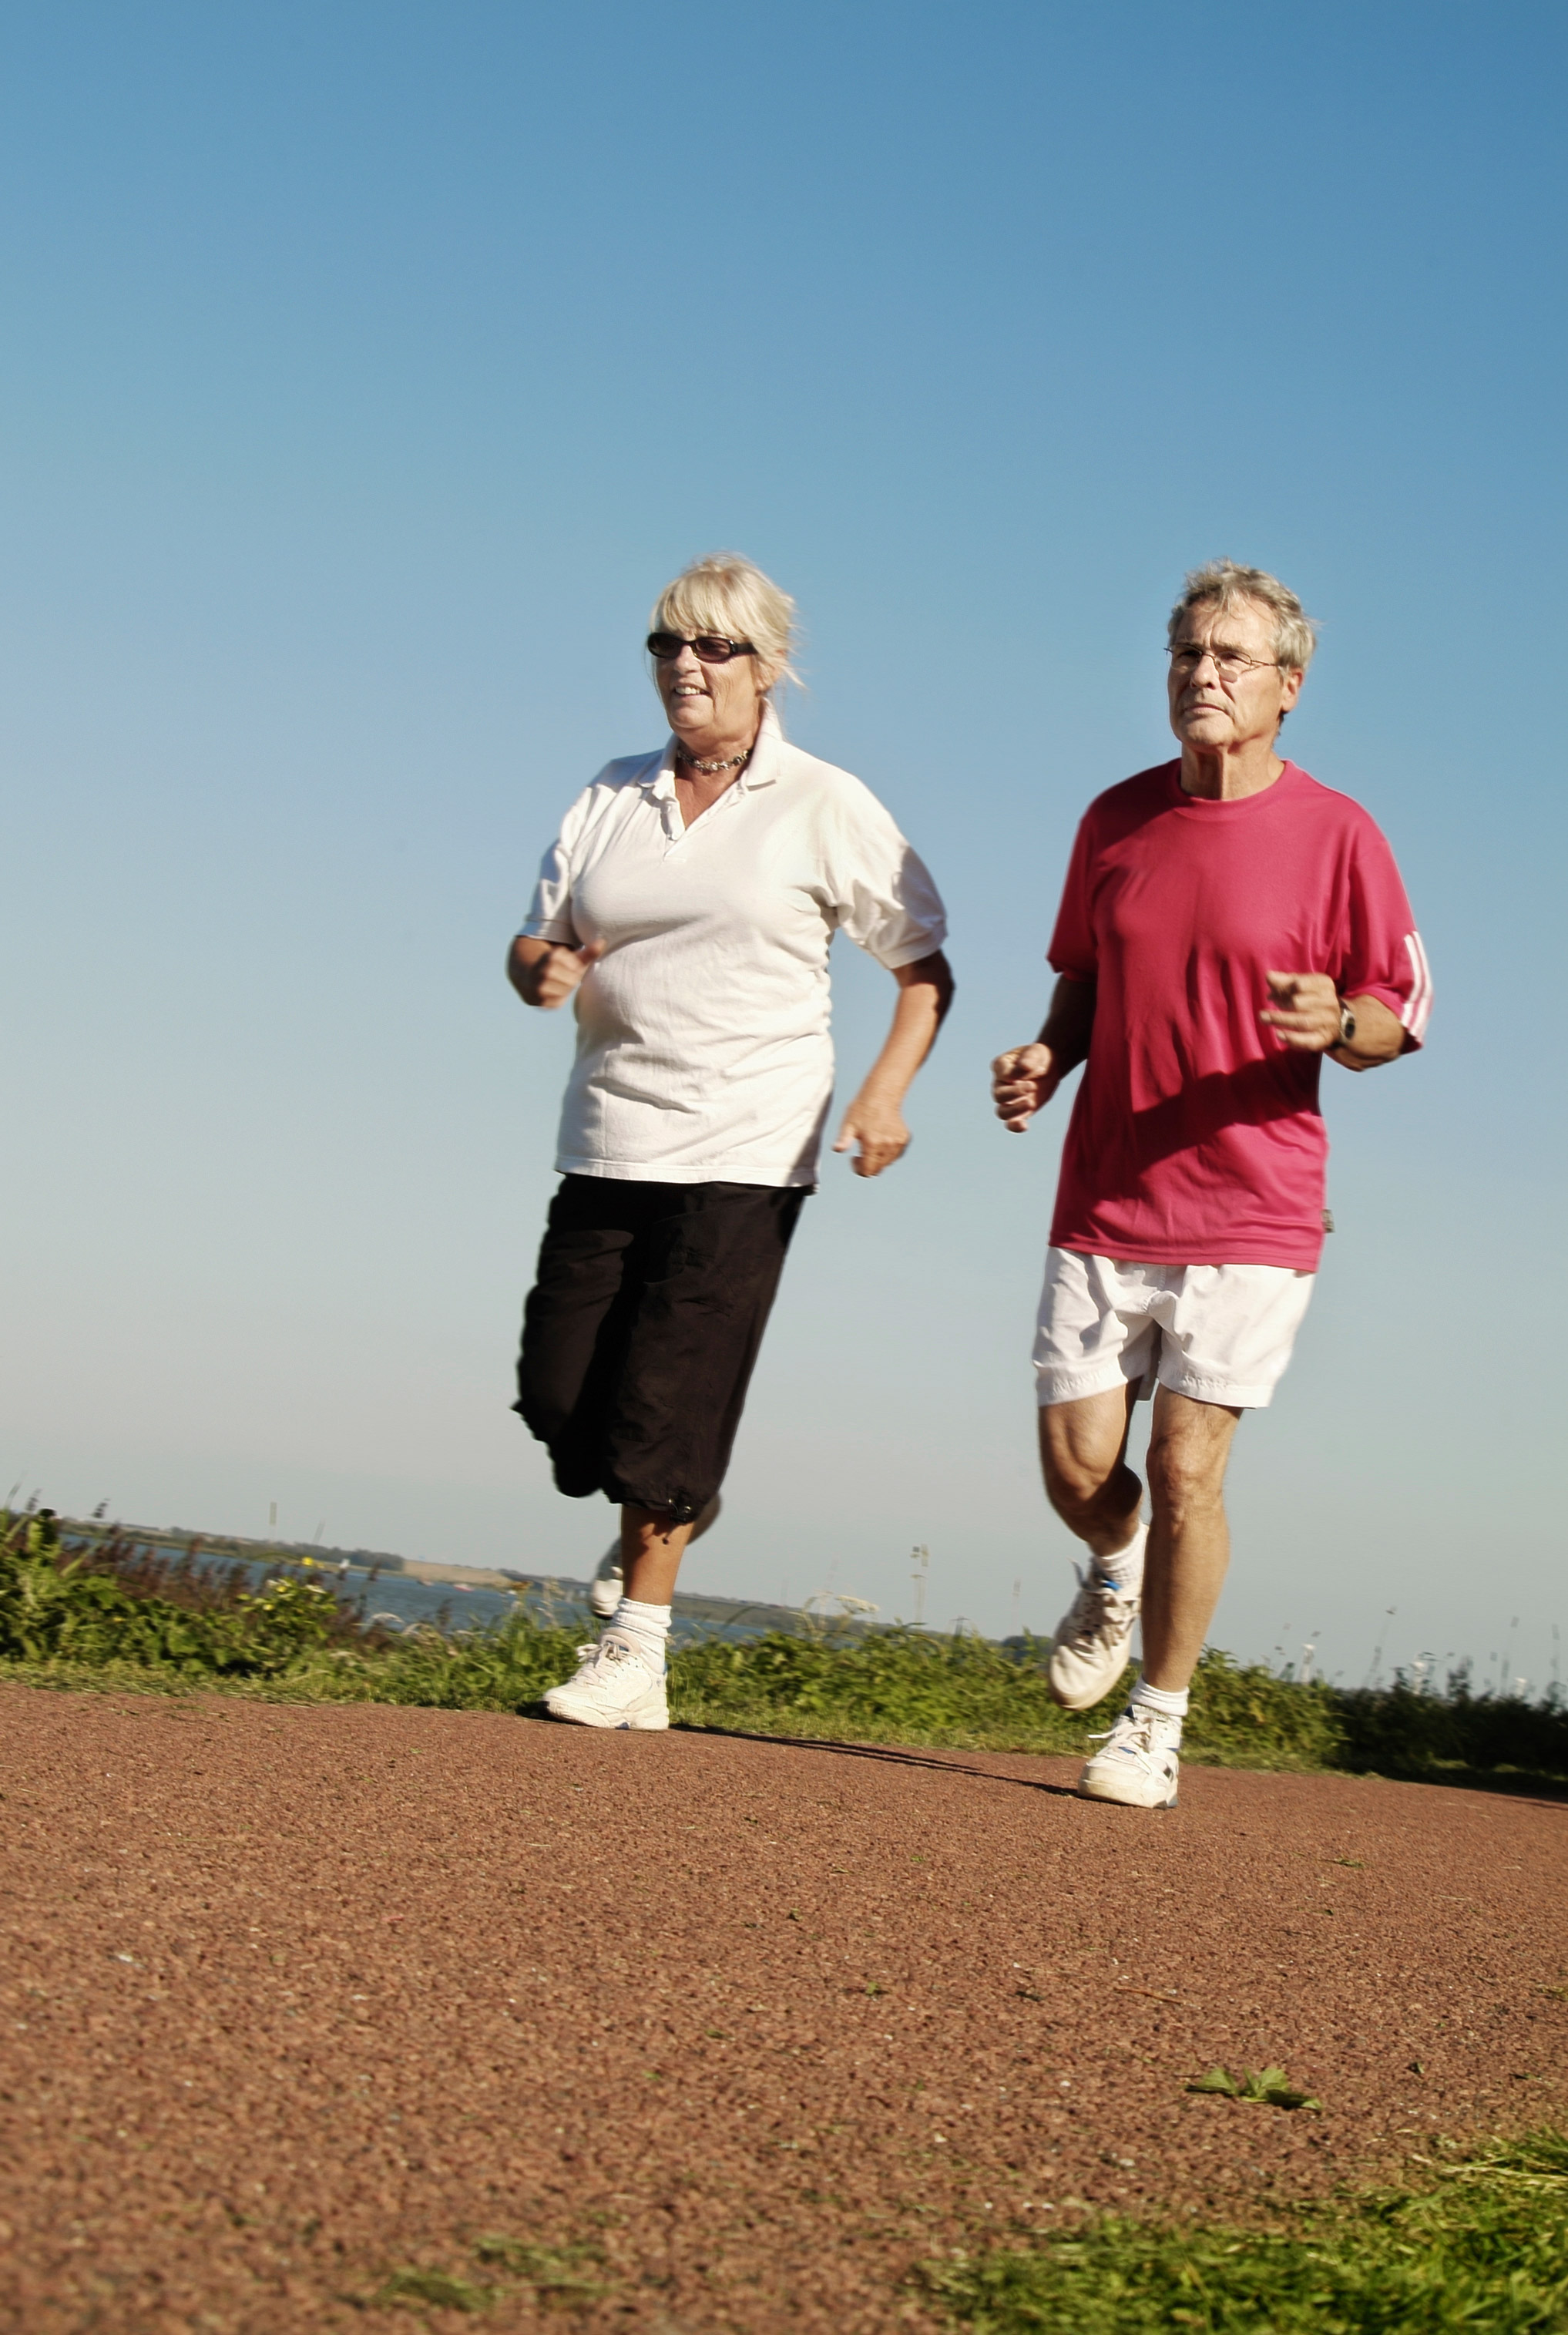 a photo of a man and a woman jogging